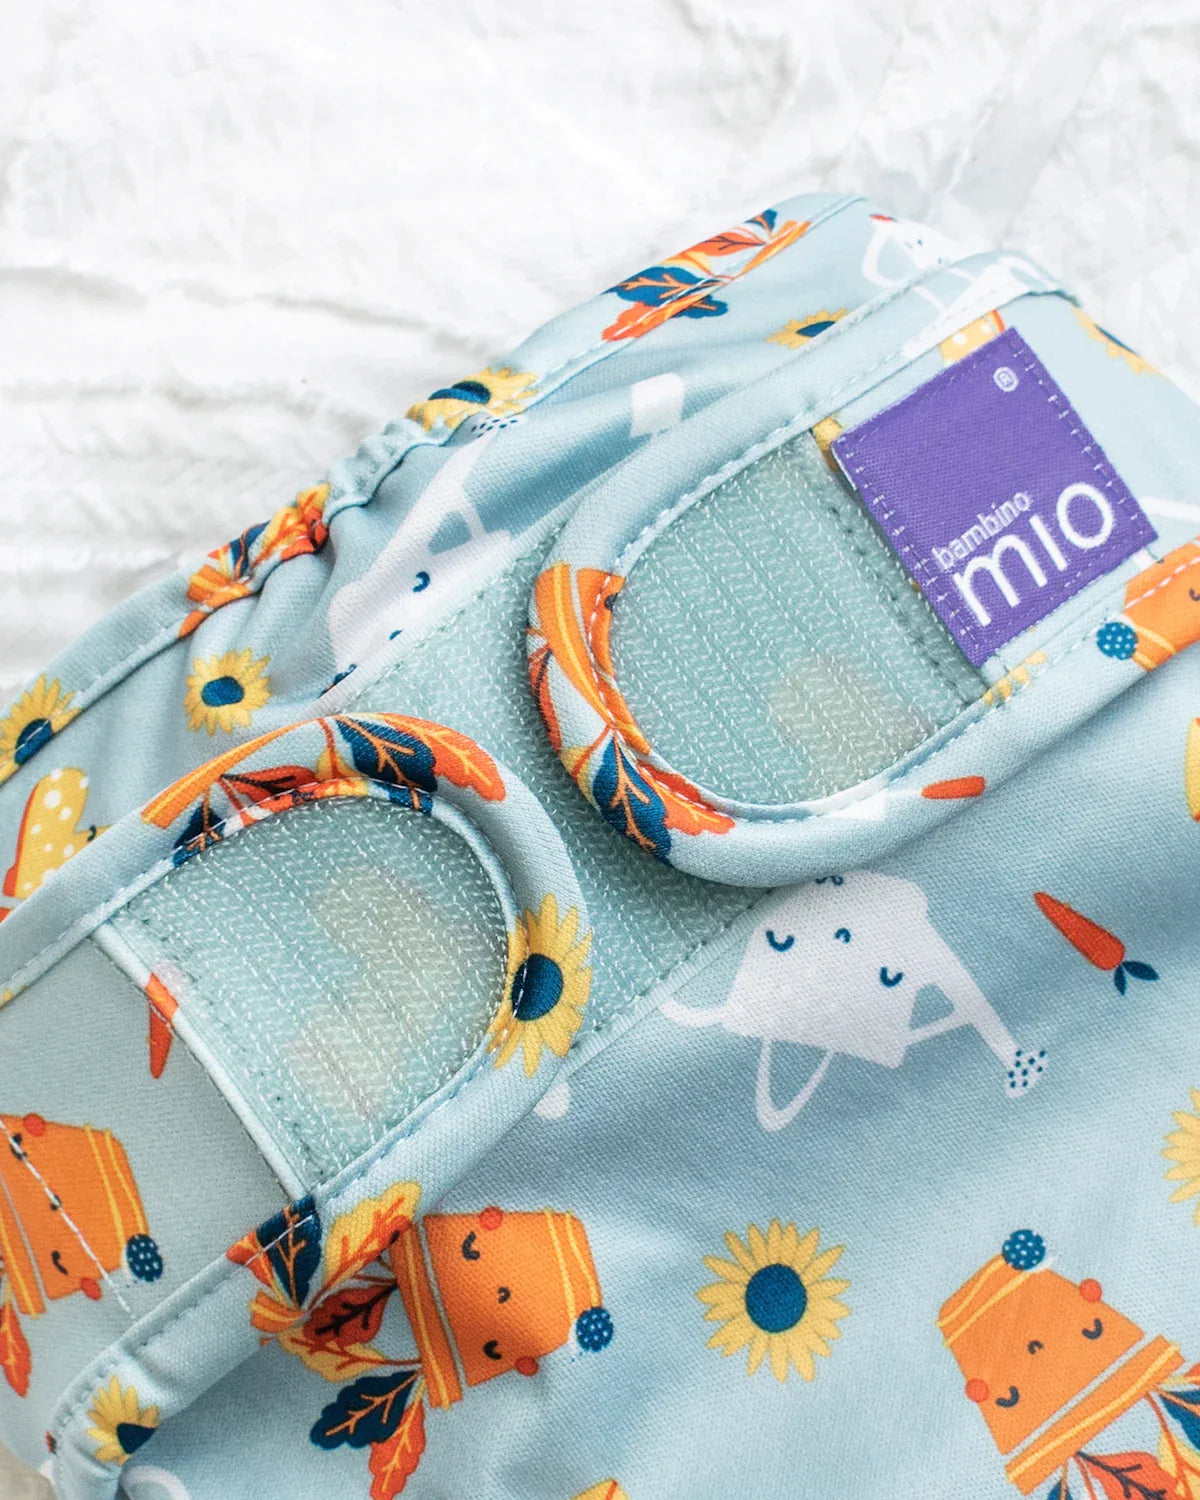 Mio Solo Save 20% Bambino Mio's award winning all in one resuable cloth  nappy at a great price.